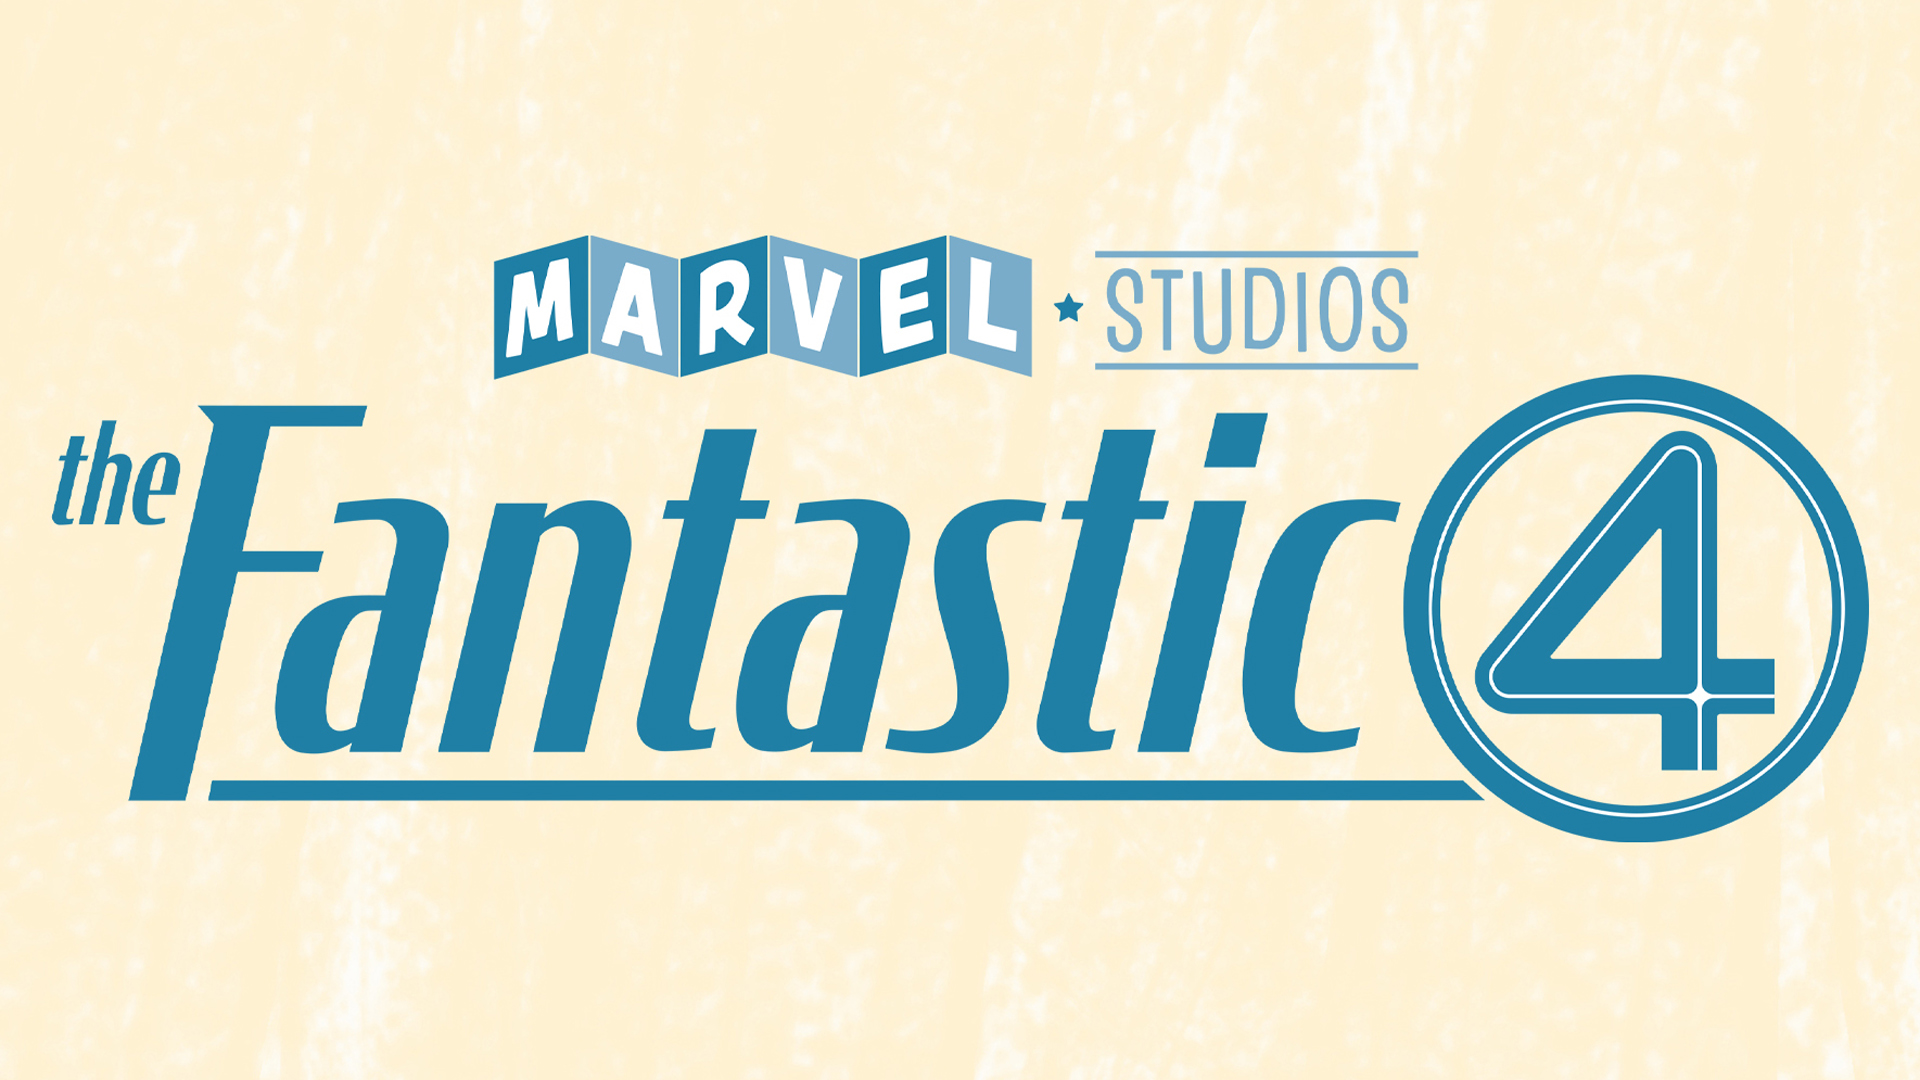 A screenshot of the official artwork for Marvel Studios' The Fantastic 4 movie